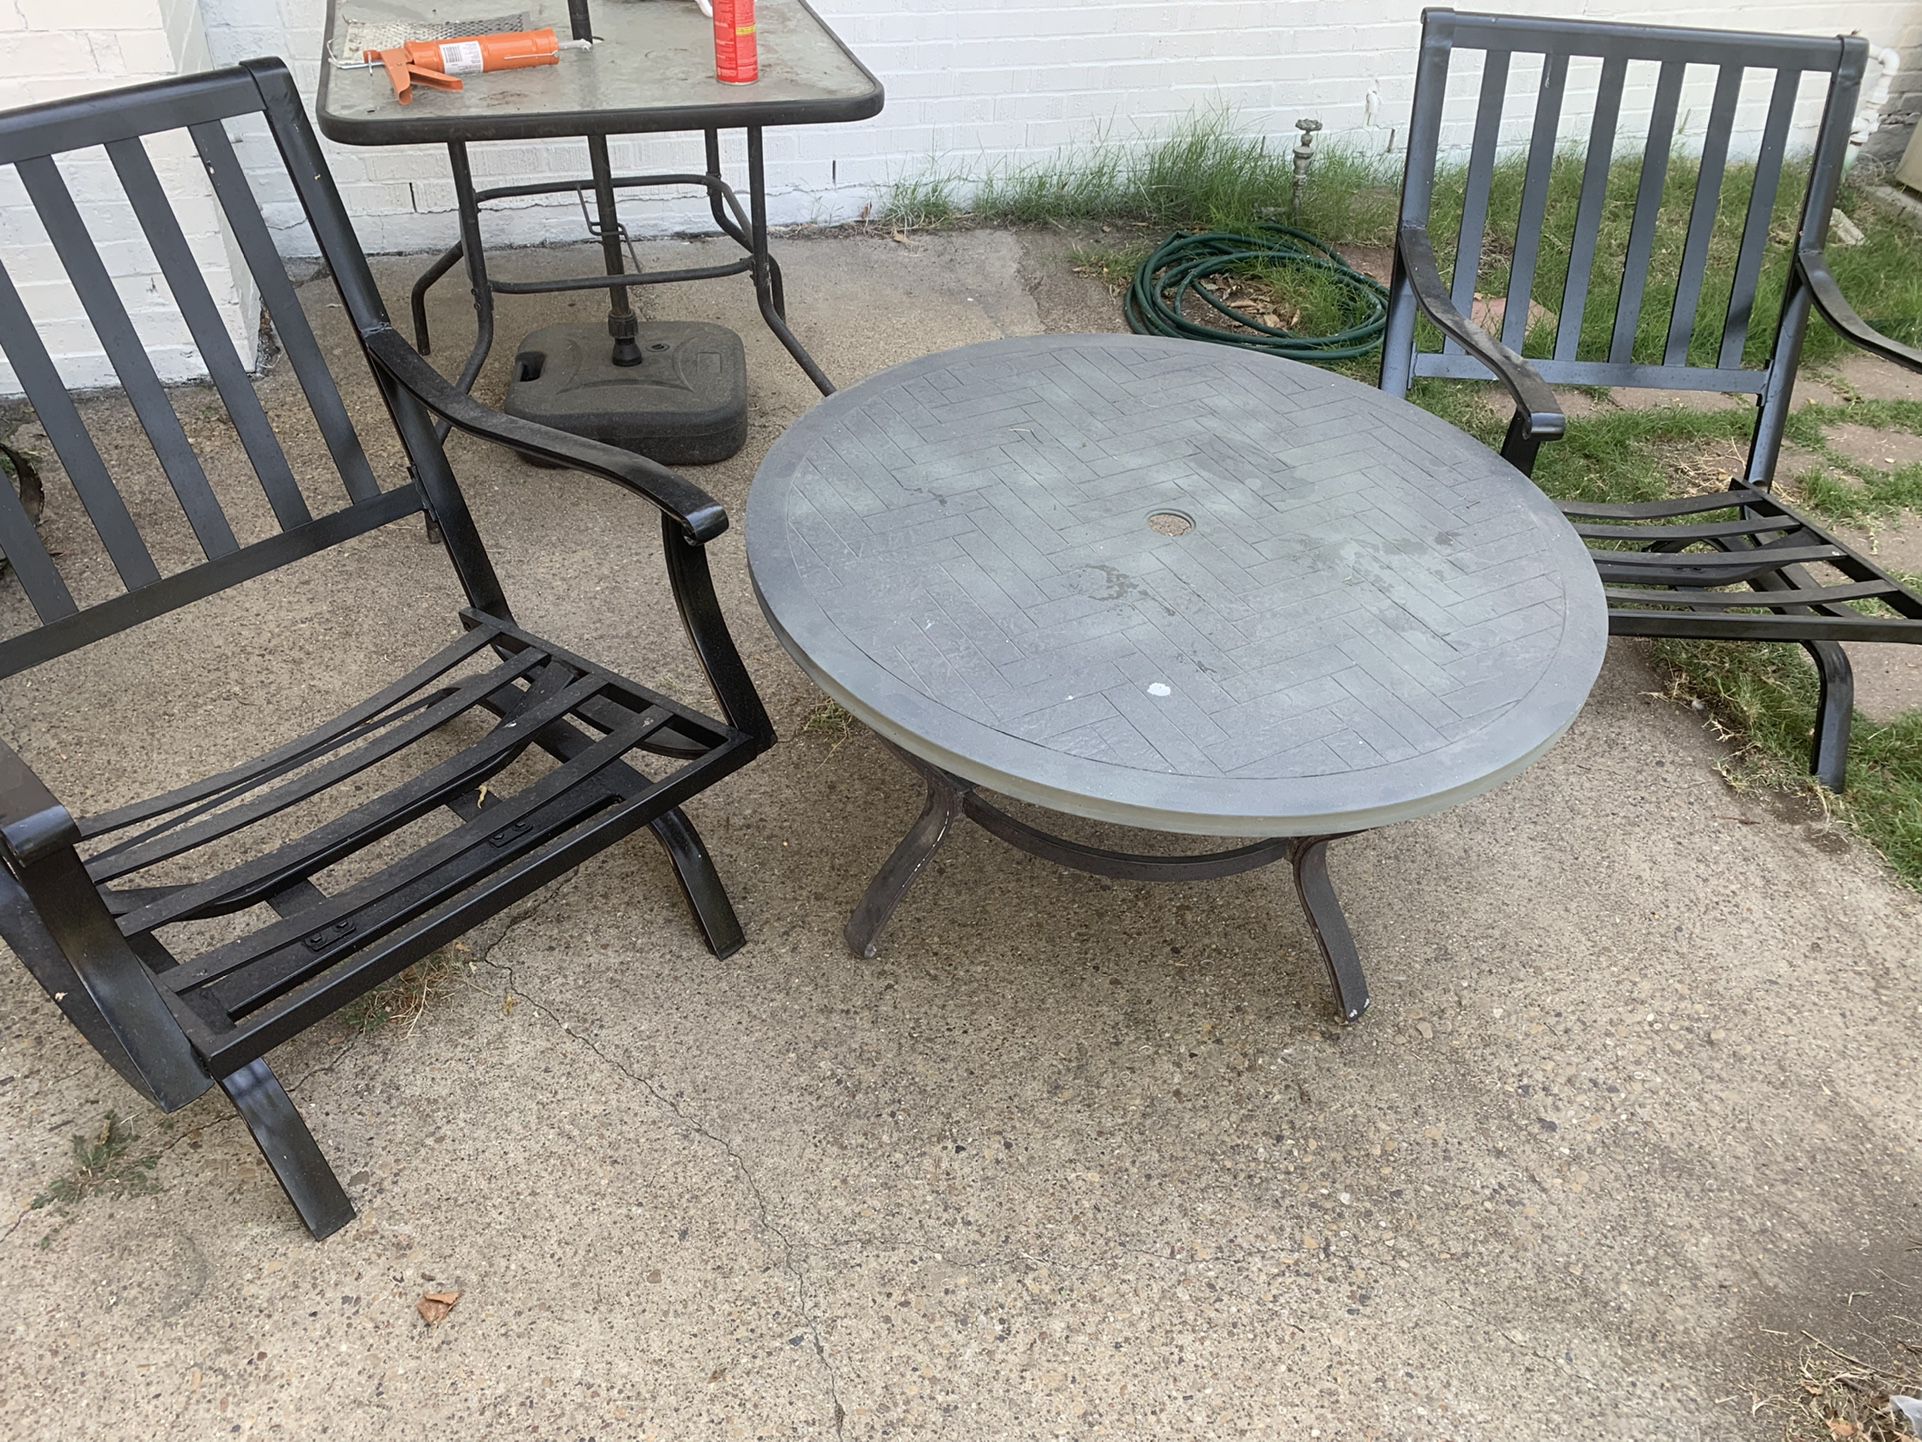 Patio Table And Chairs 3 Piece Just Need Some Cushions And You Can Add An Umbrella If You Like 